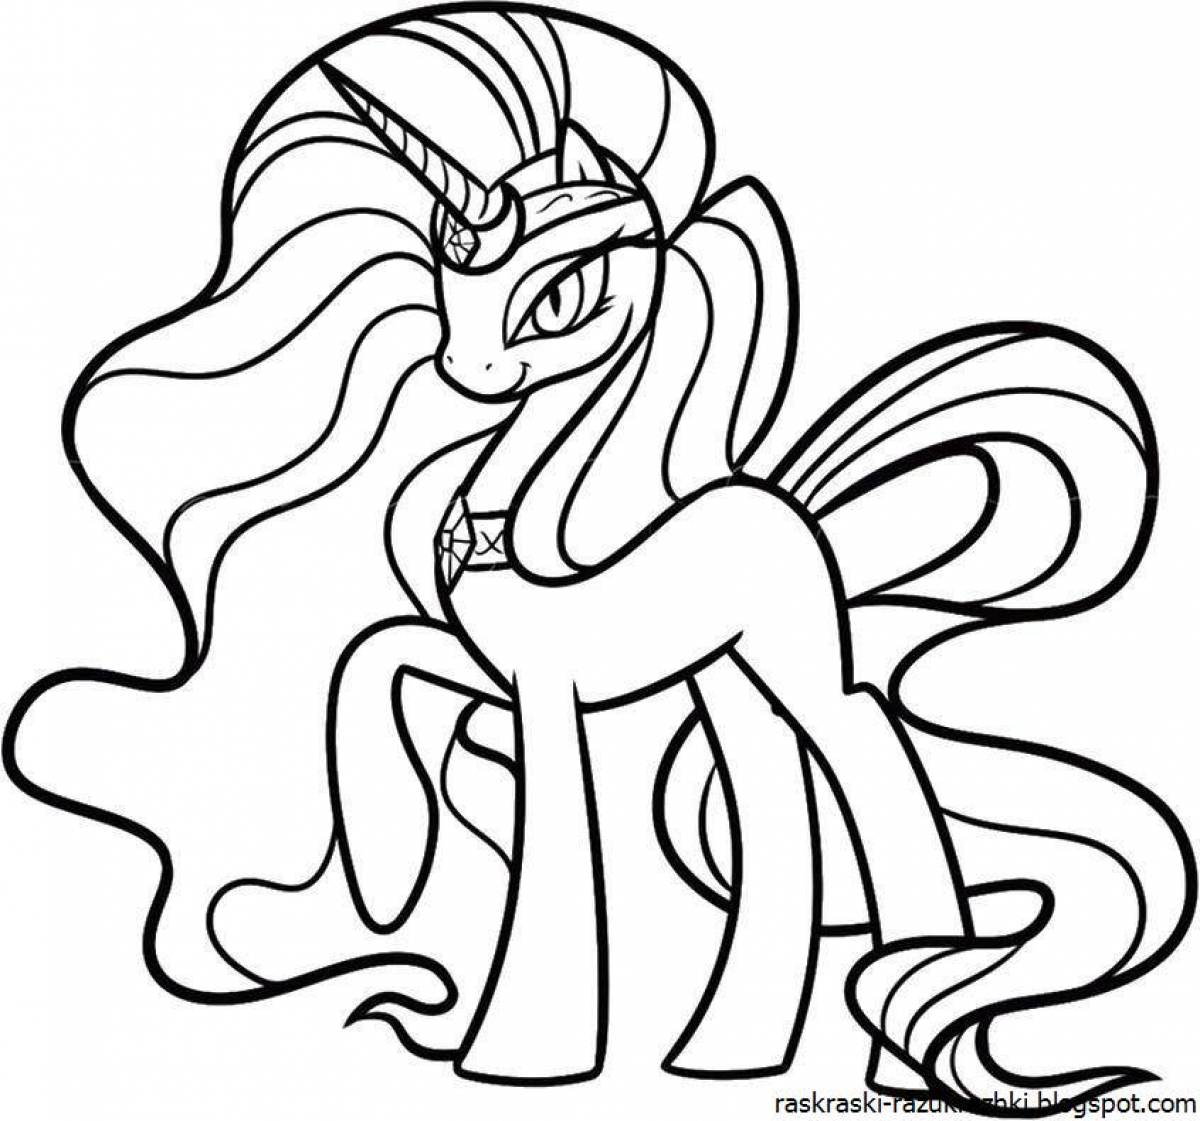 Coloring page dazzling pony